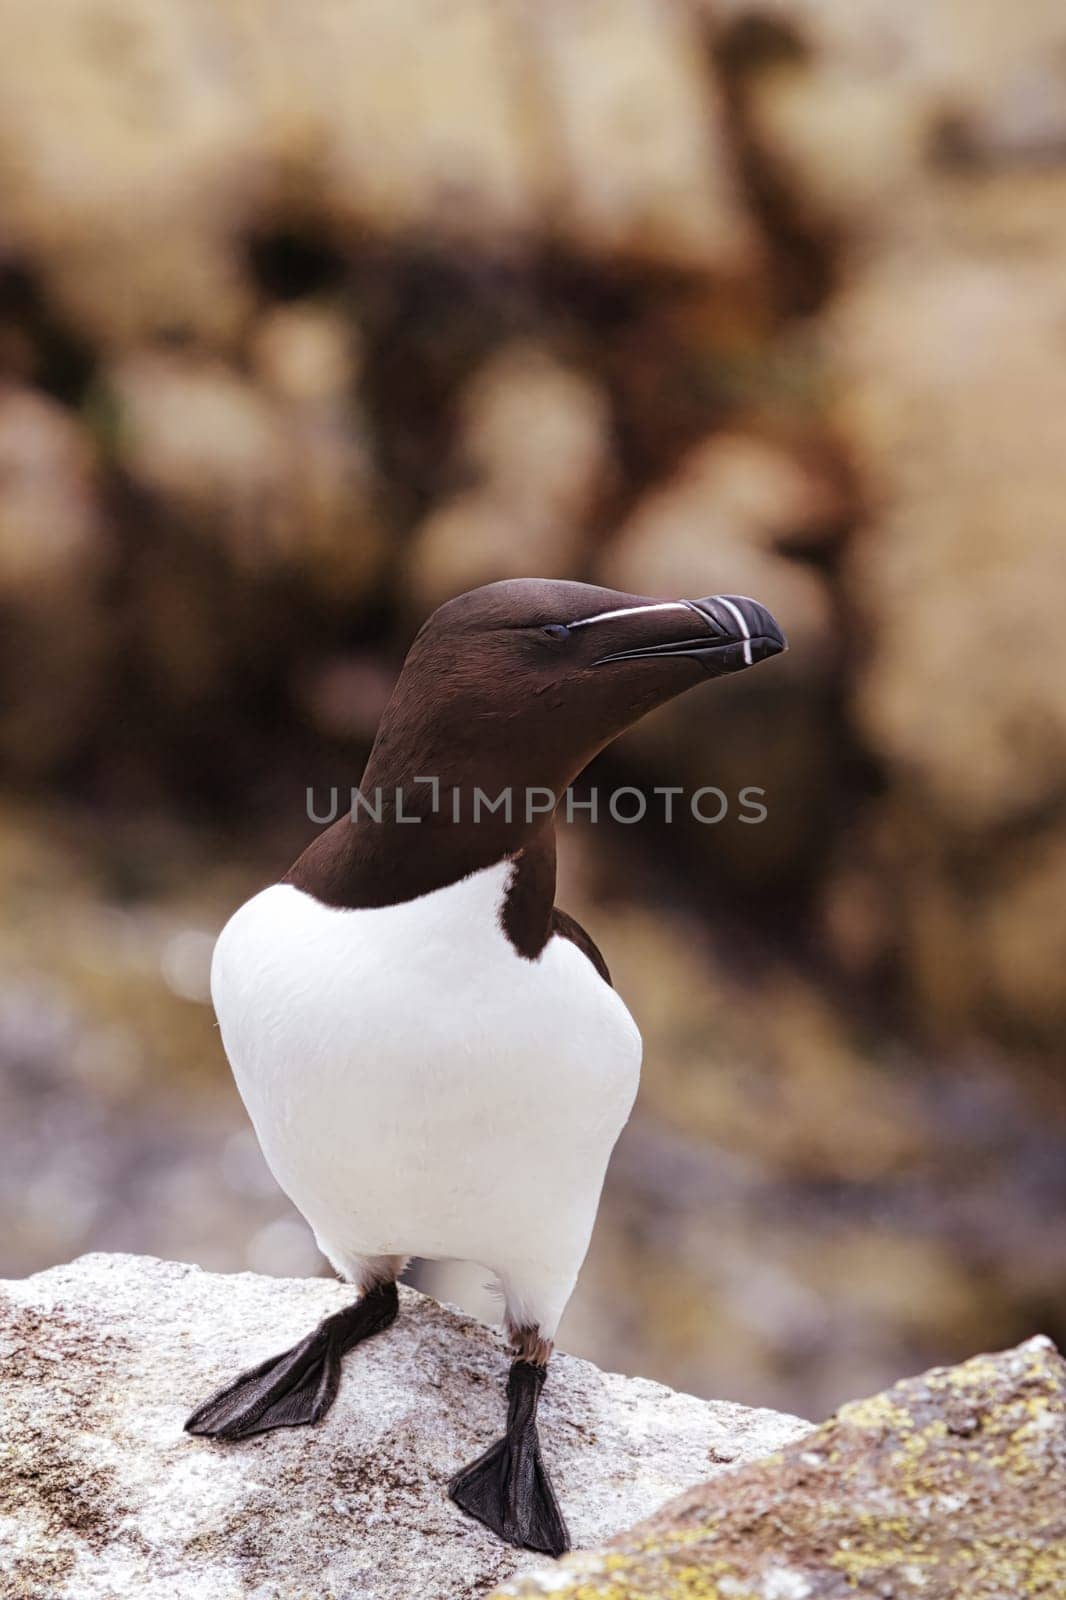 Experience the arresting beauty of one of the ocean's elusive birds with this close-up photograph of a Razorbill, captured on the iconic Isle of May. The image offers an unparalleled look at the bird's intricate feather patterns, striking beak, and intense gaze, allowing the viewer to appreciate the subtleties that make this species so captivating. The close-up perspective provides an intimacy that is often missing in wildlife photography, making you feel as if you're sharing a quiet moment with this remarkable bird.